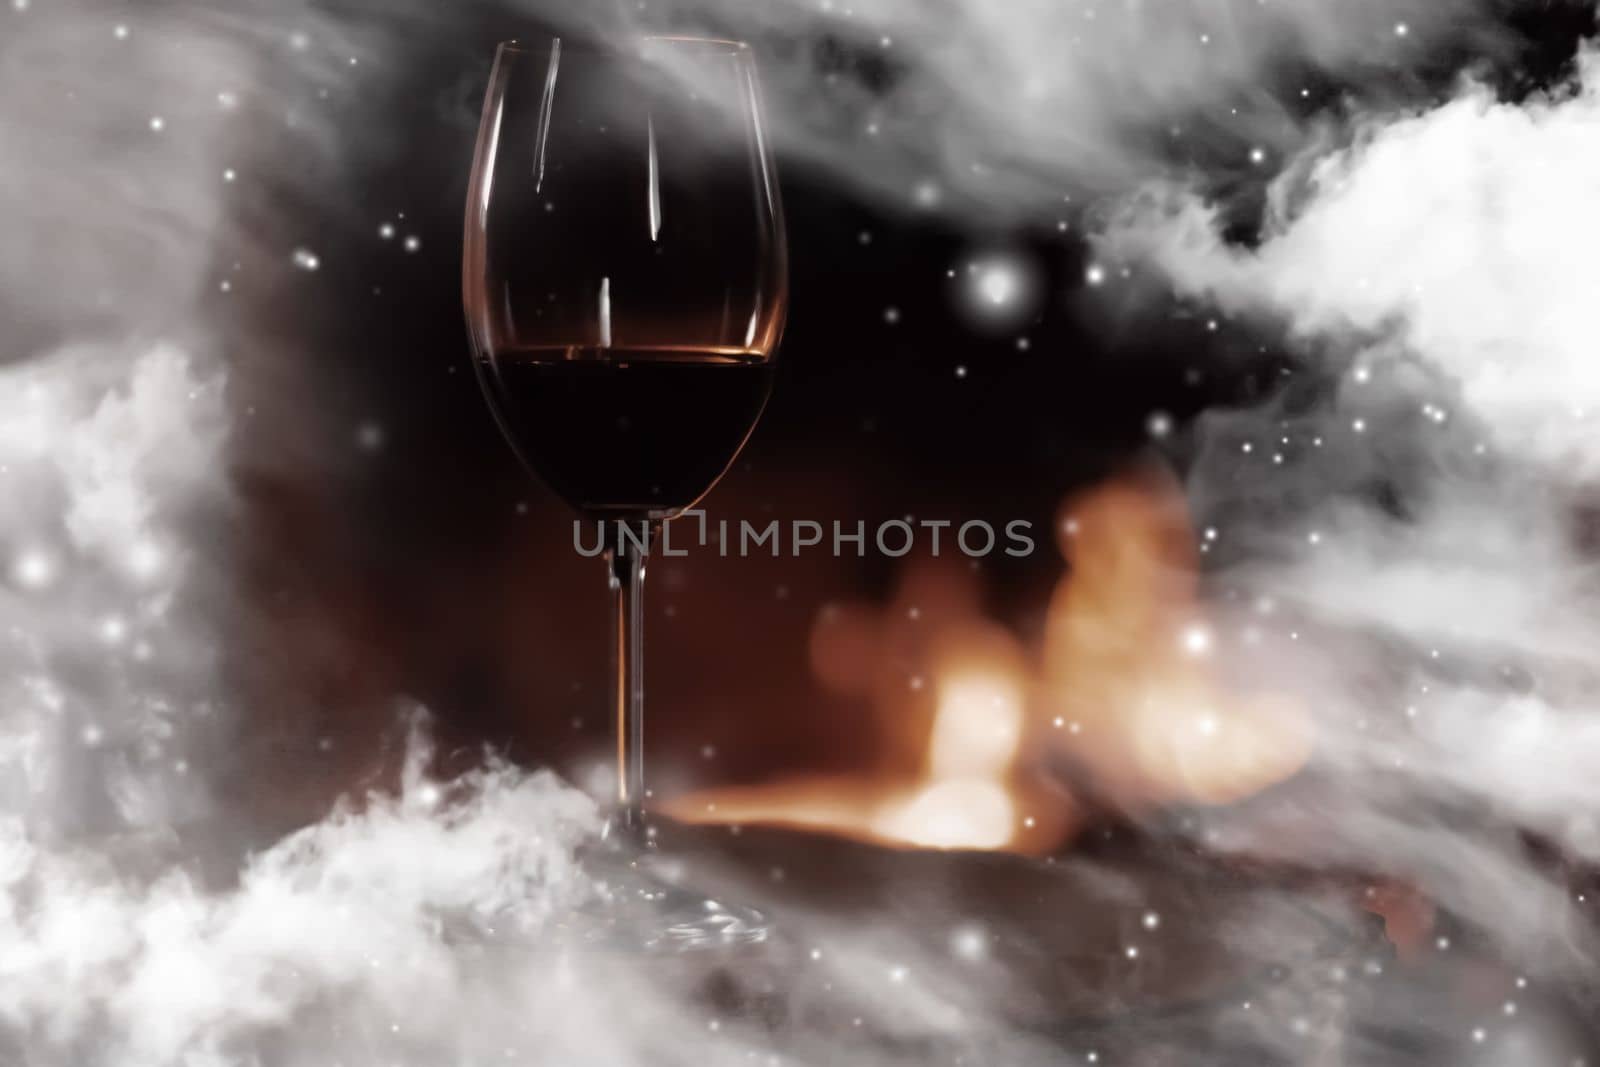 Winter atmosphere and Christmas holiday time, glass of wine in front of fireplace covered with snowy effect on window glass, holidays backgrounds